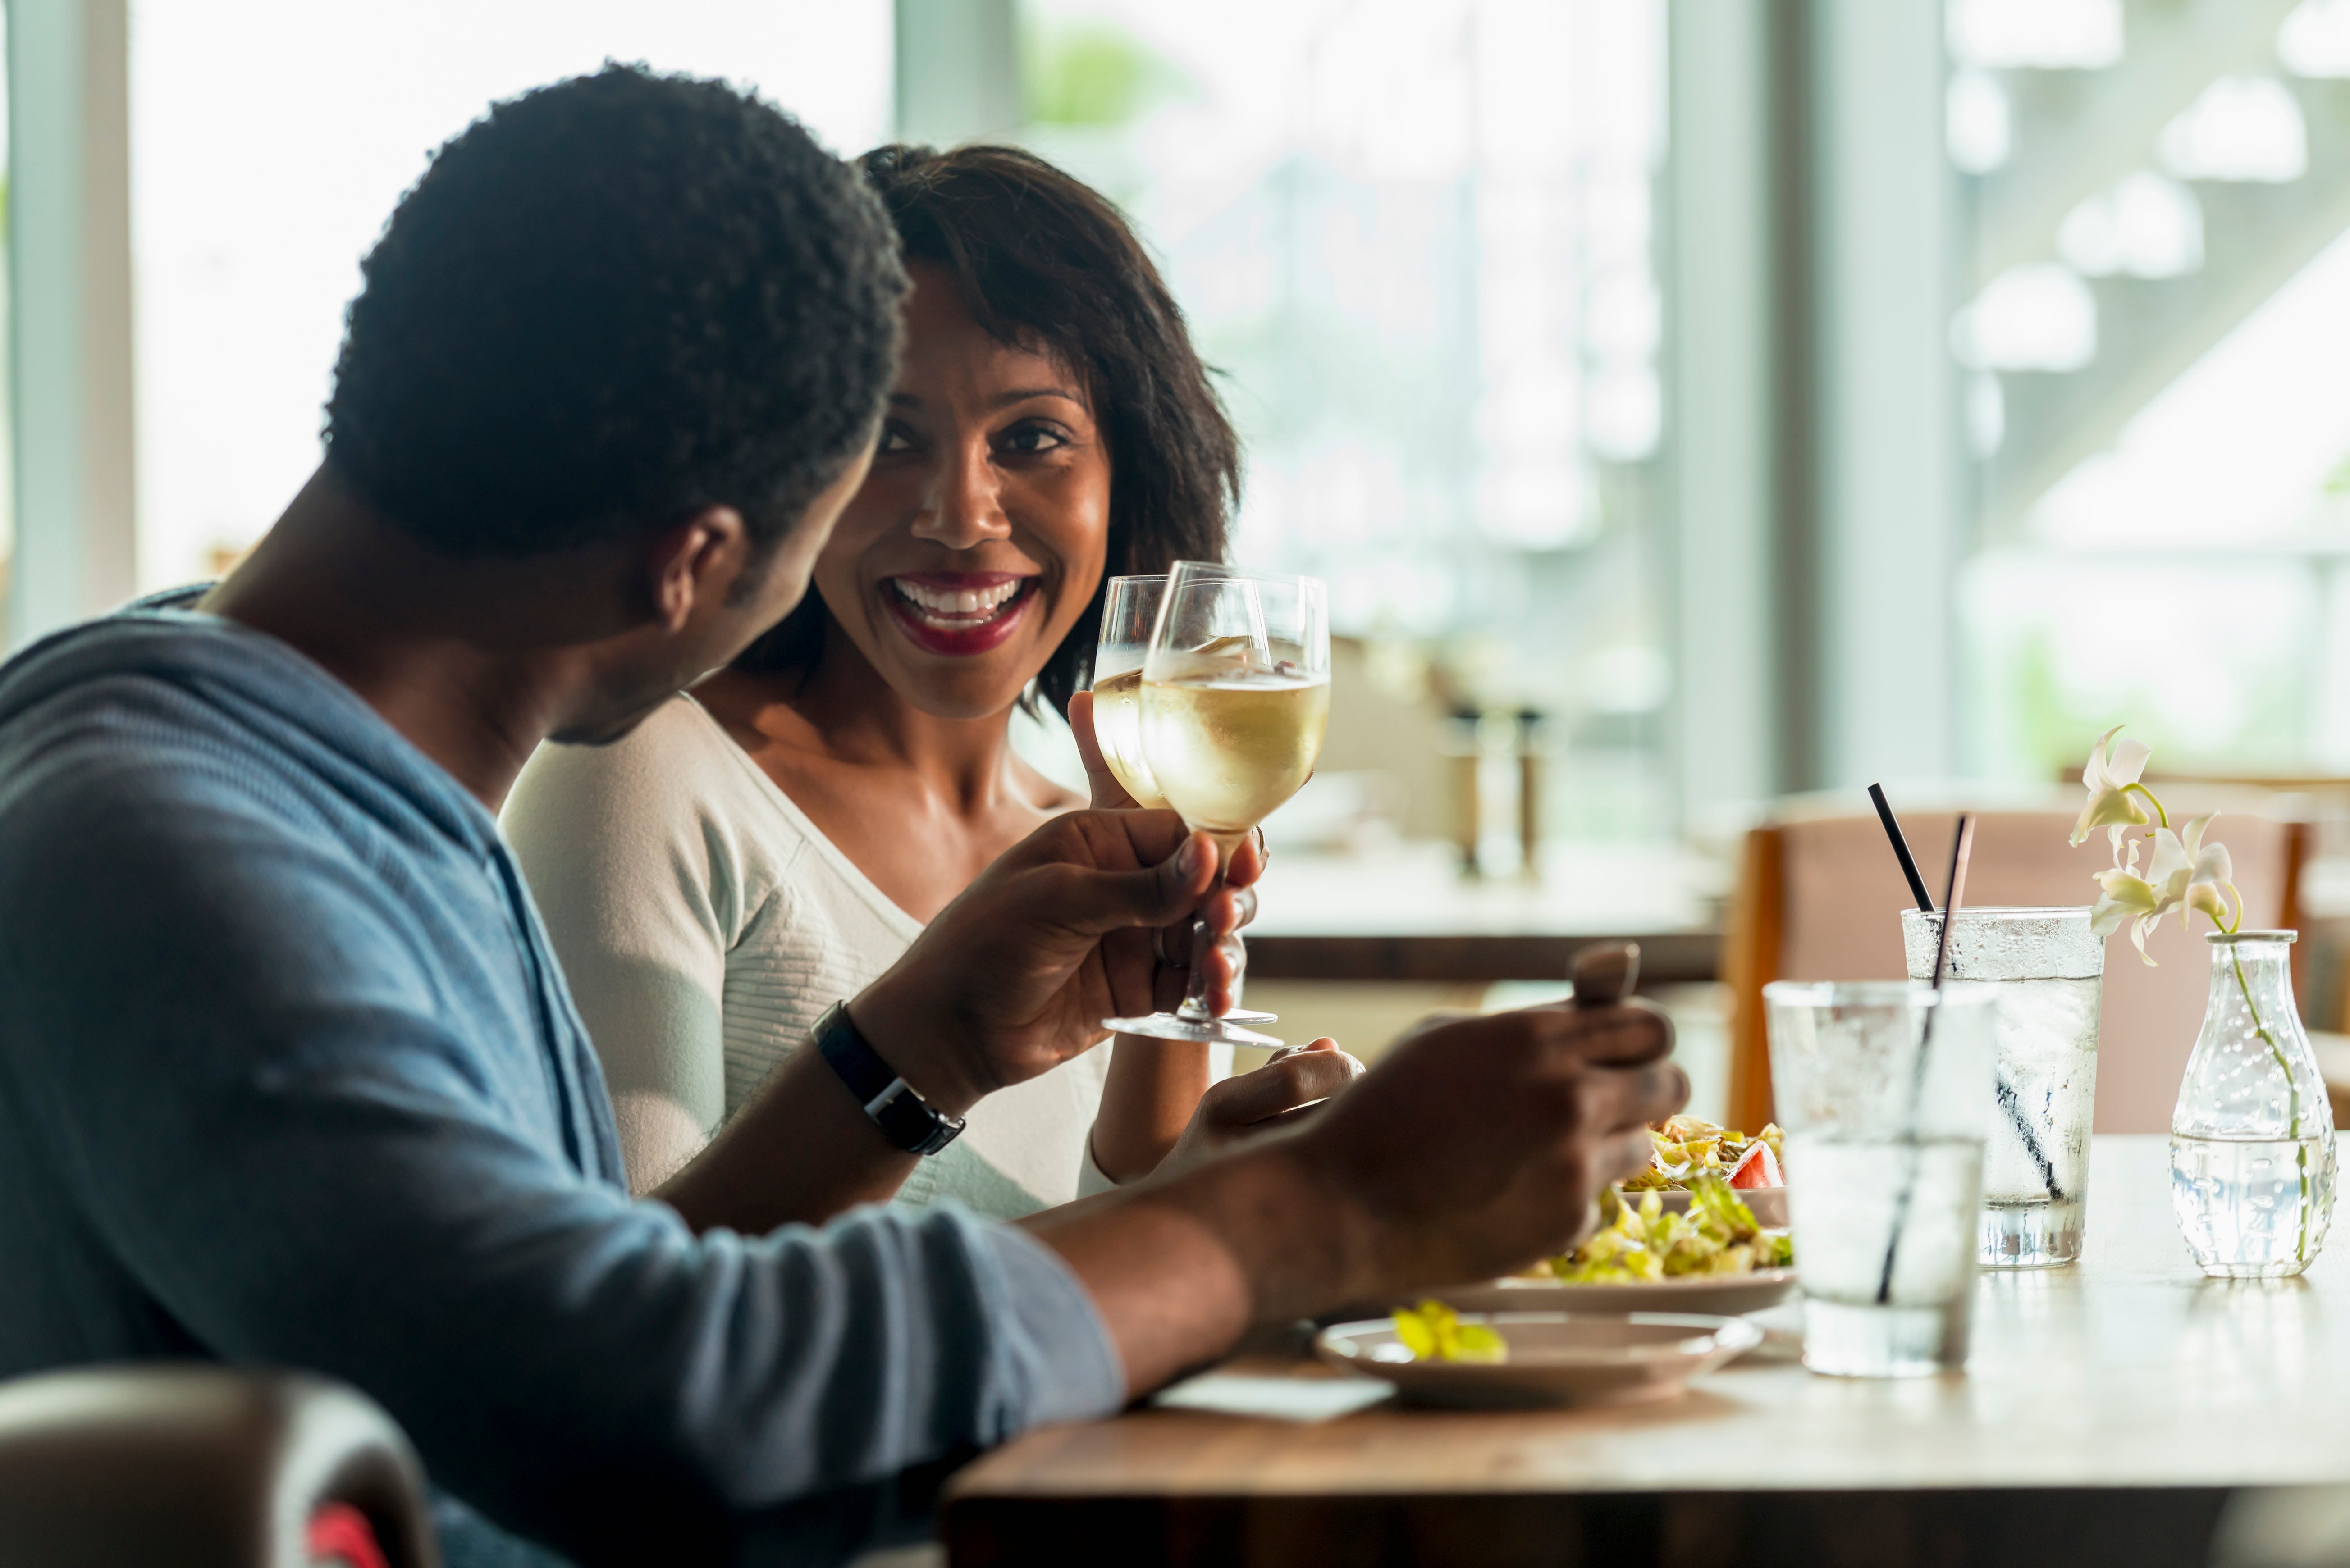 8 Warning Signs Of A Really Bad First Date